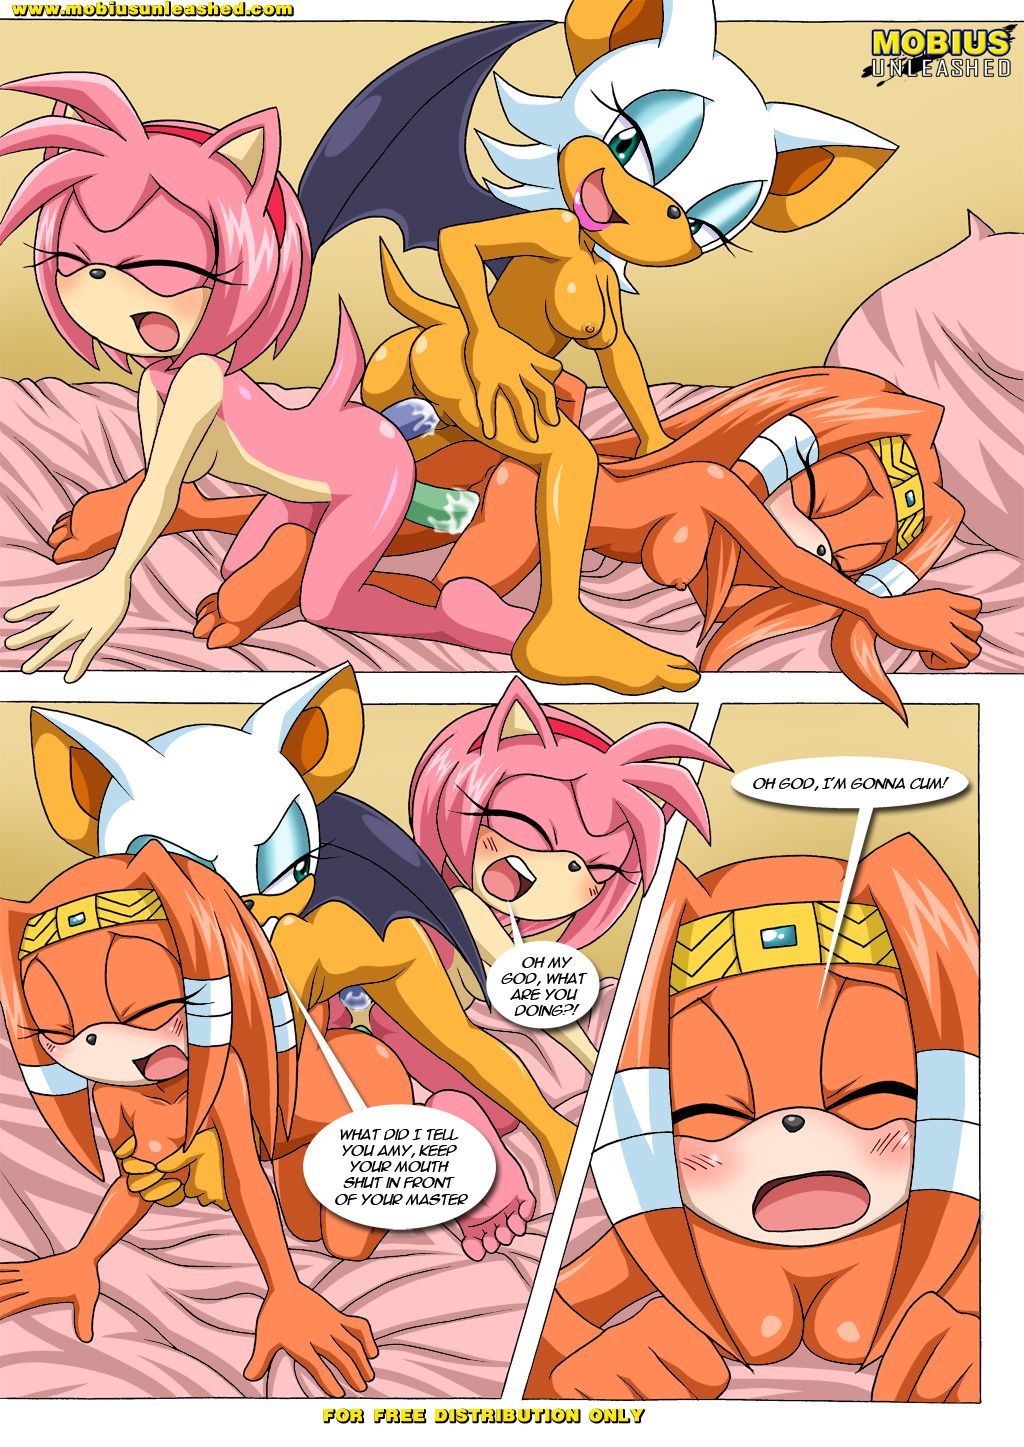 Amy and rouge kissing naked